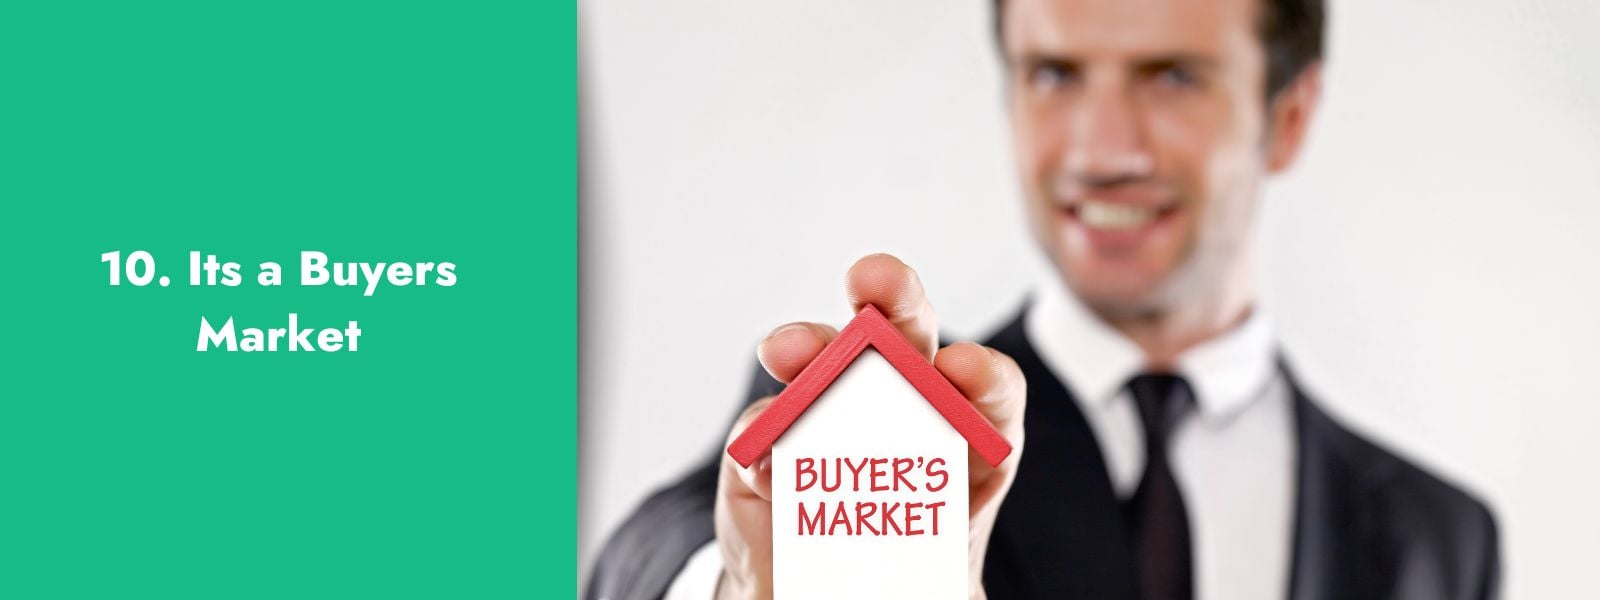 10. Its a Buyers Market